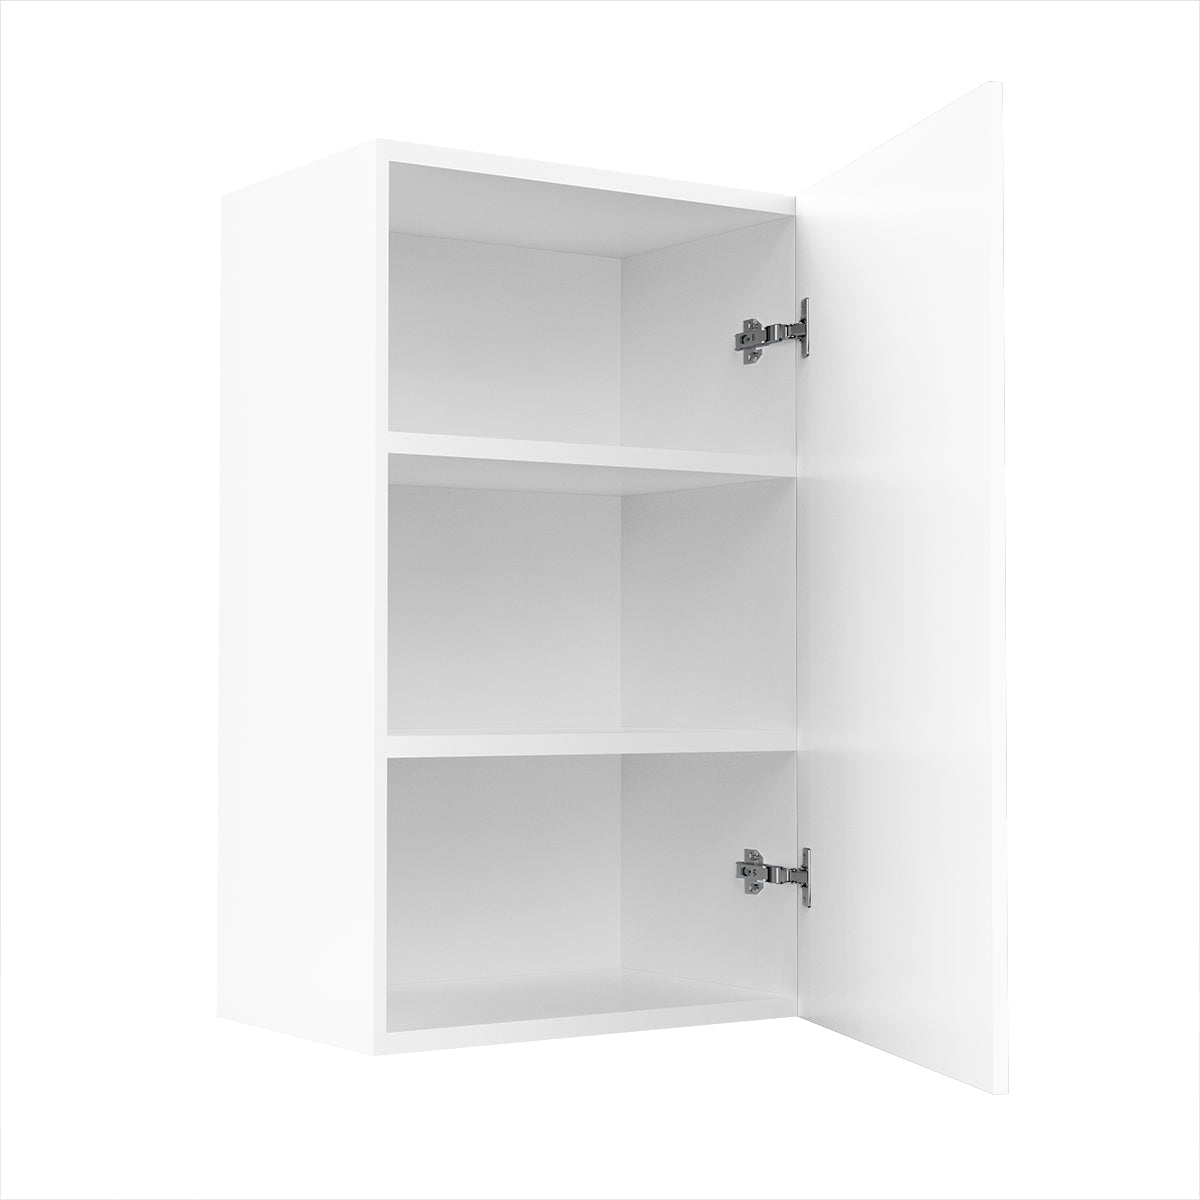 RTA - Glossy White - Single Door Wall Cabinets | 18"W x 30"H x 12"D